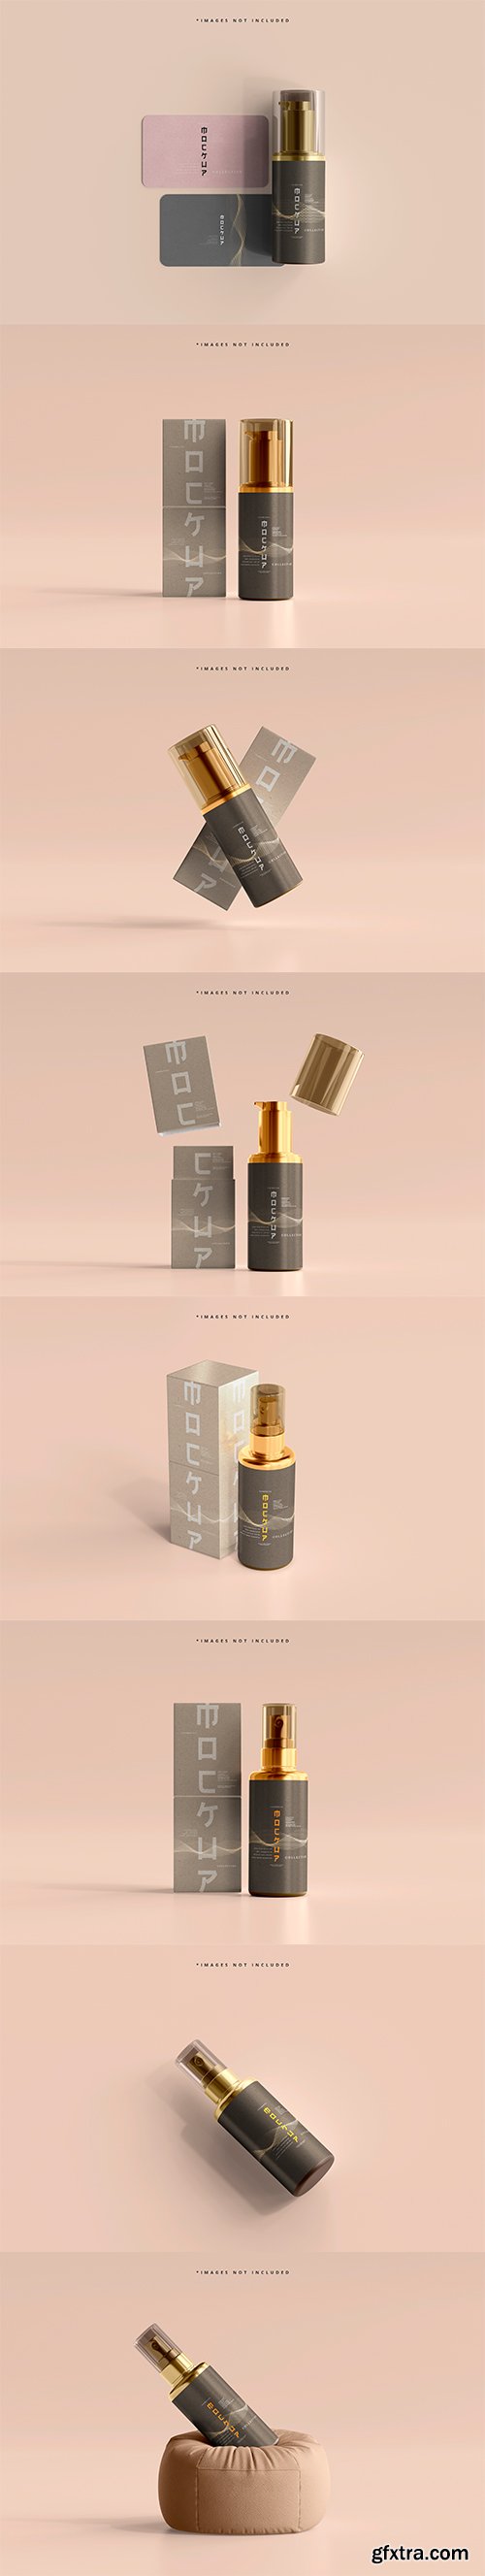 Cosmetic spray bottle and box mockup